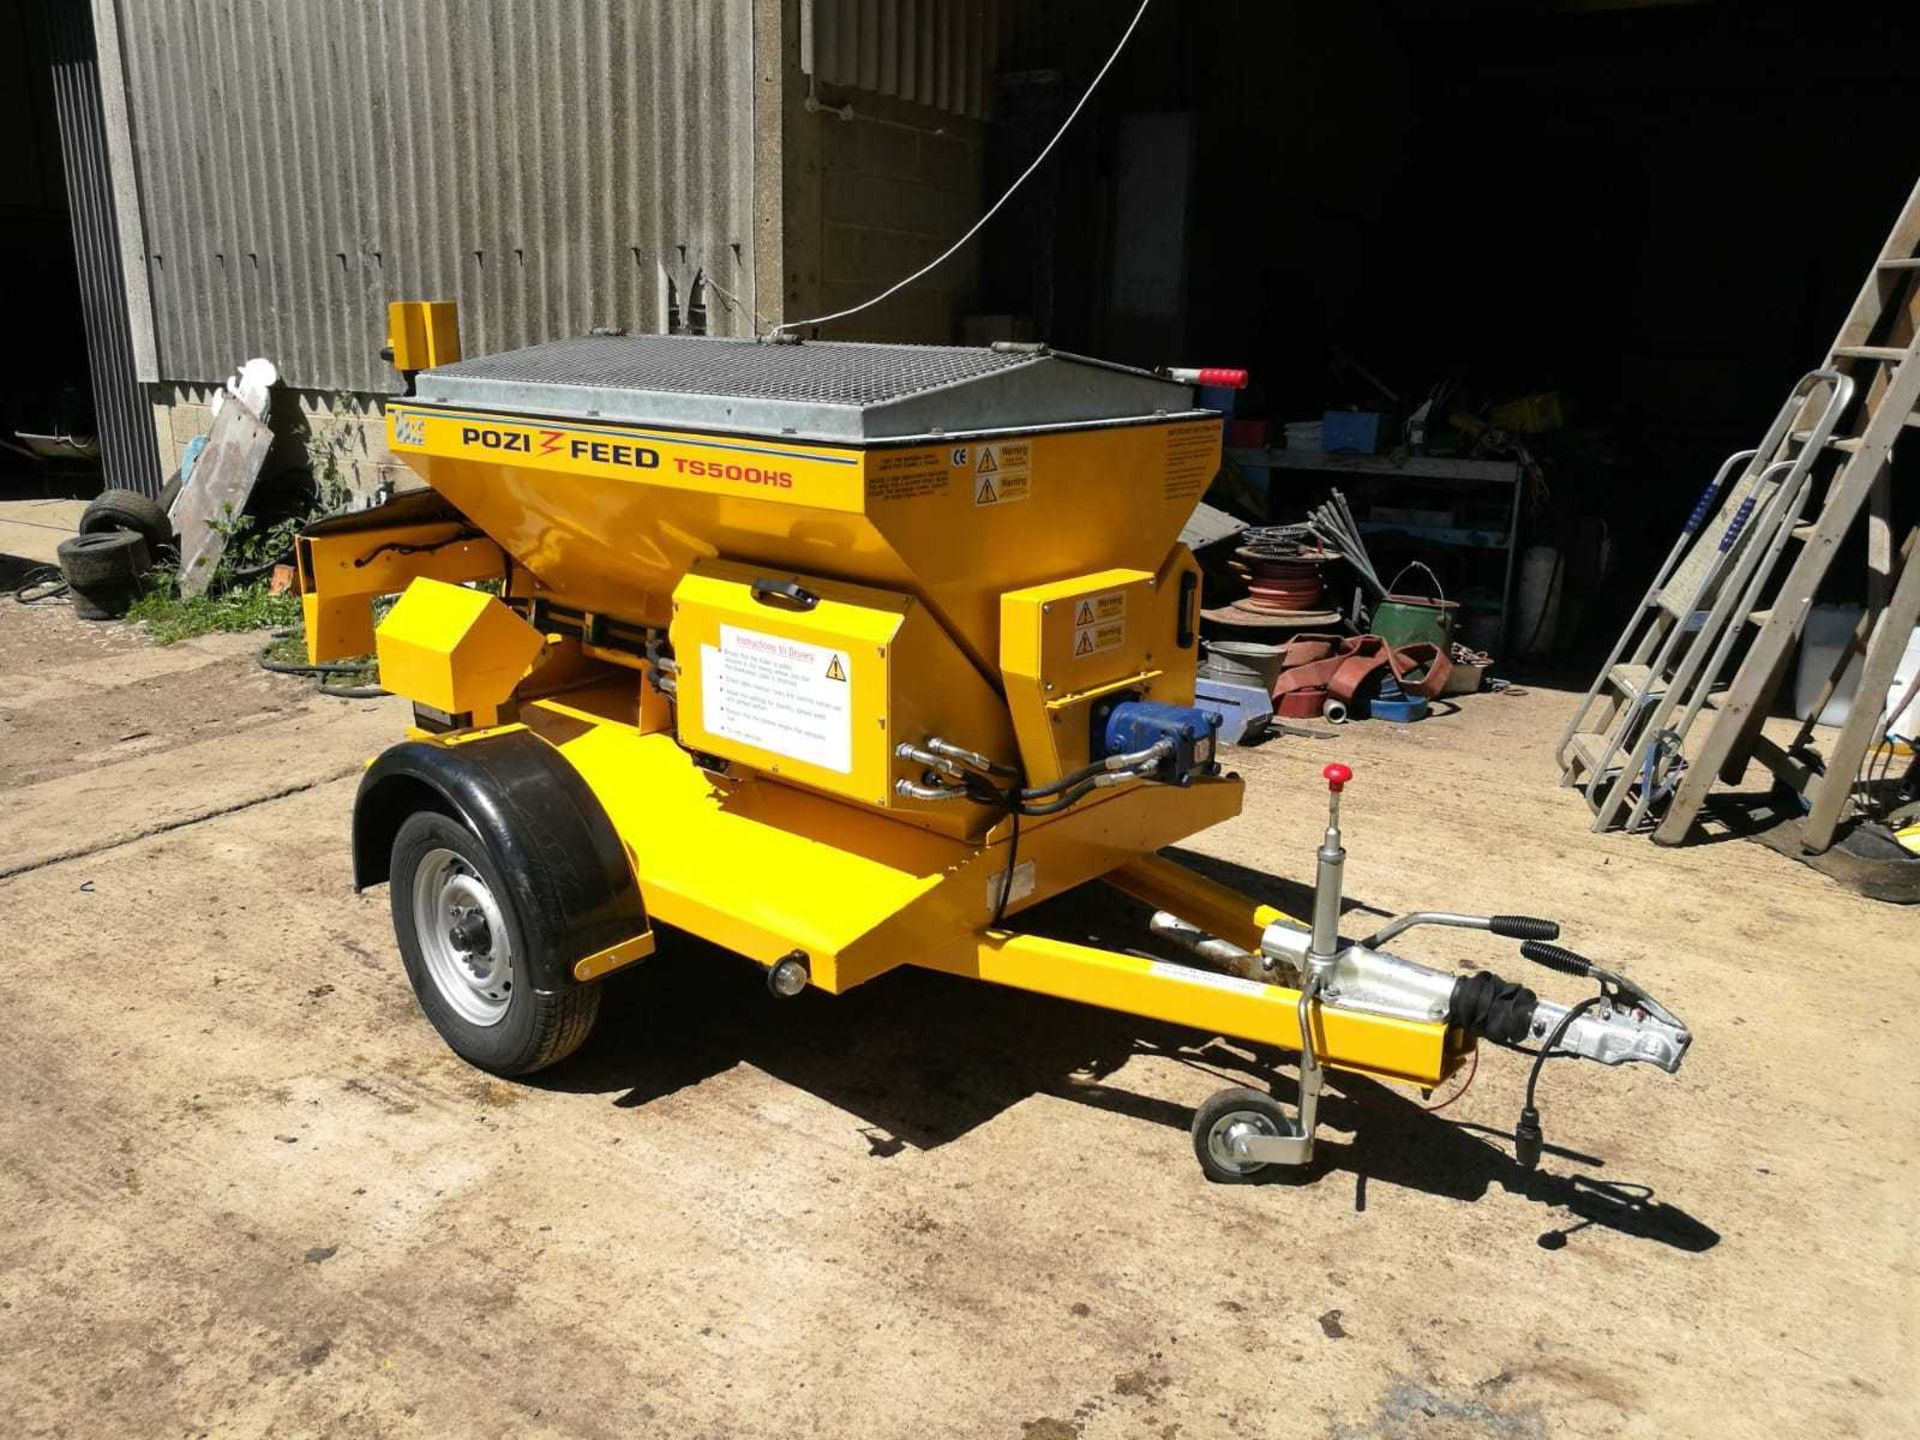 VALE POZI FEED TS500HS GRITTING TRAILER, SINGLE AXLE, 1300GTW *PLUS VAT* - Image 7 of 12